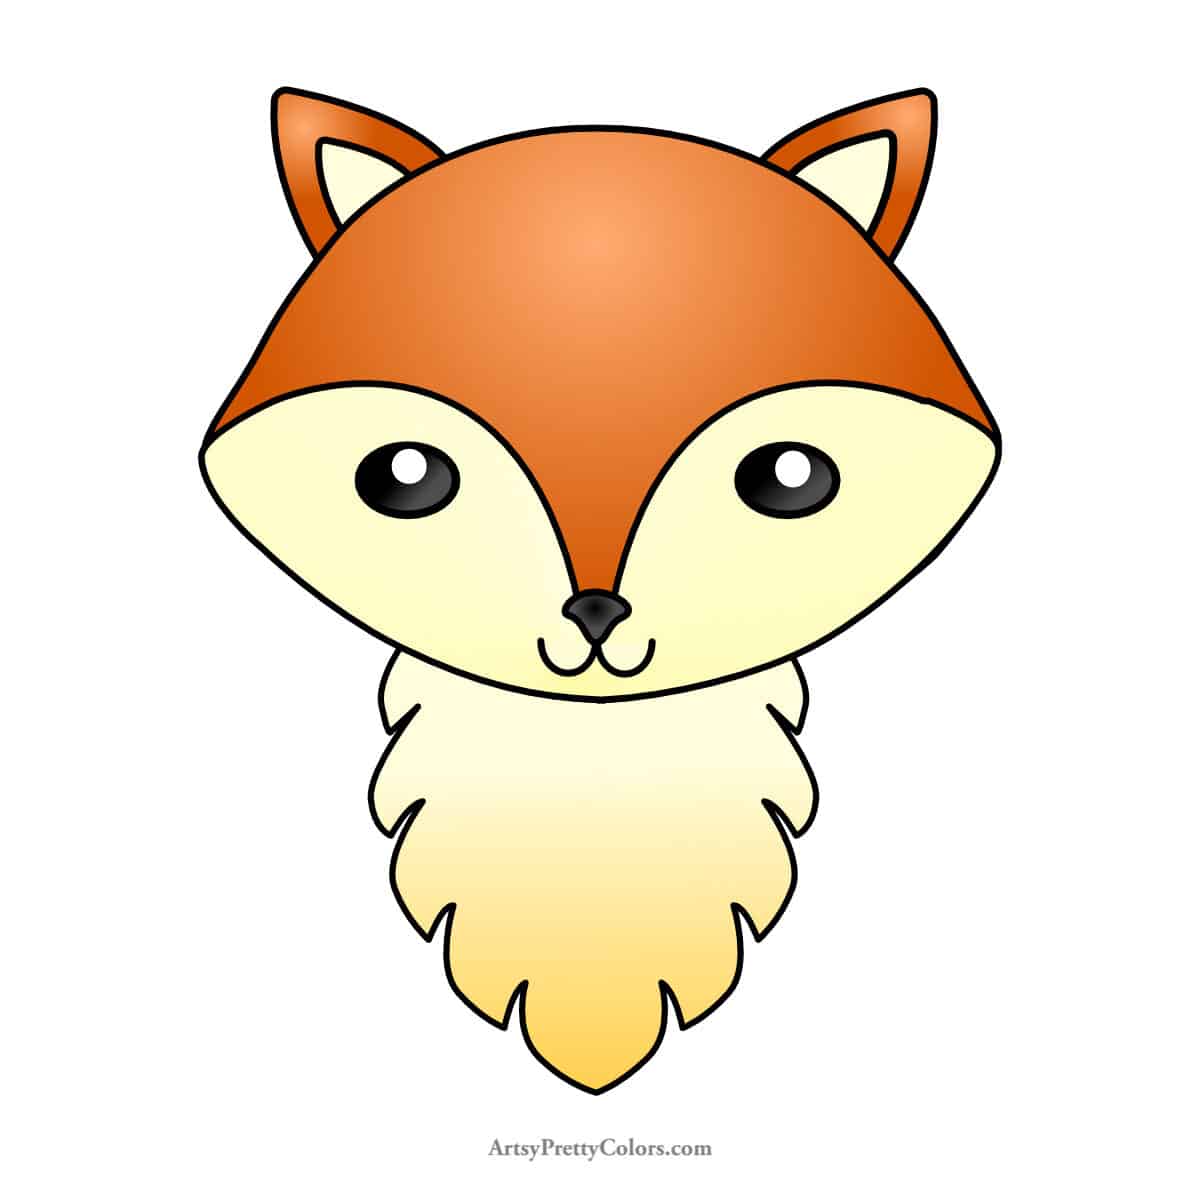 a colored in, finished pic from a tutorial for drawing a fox head.